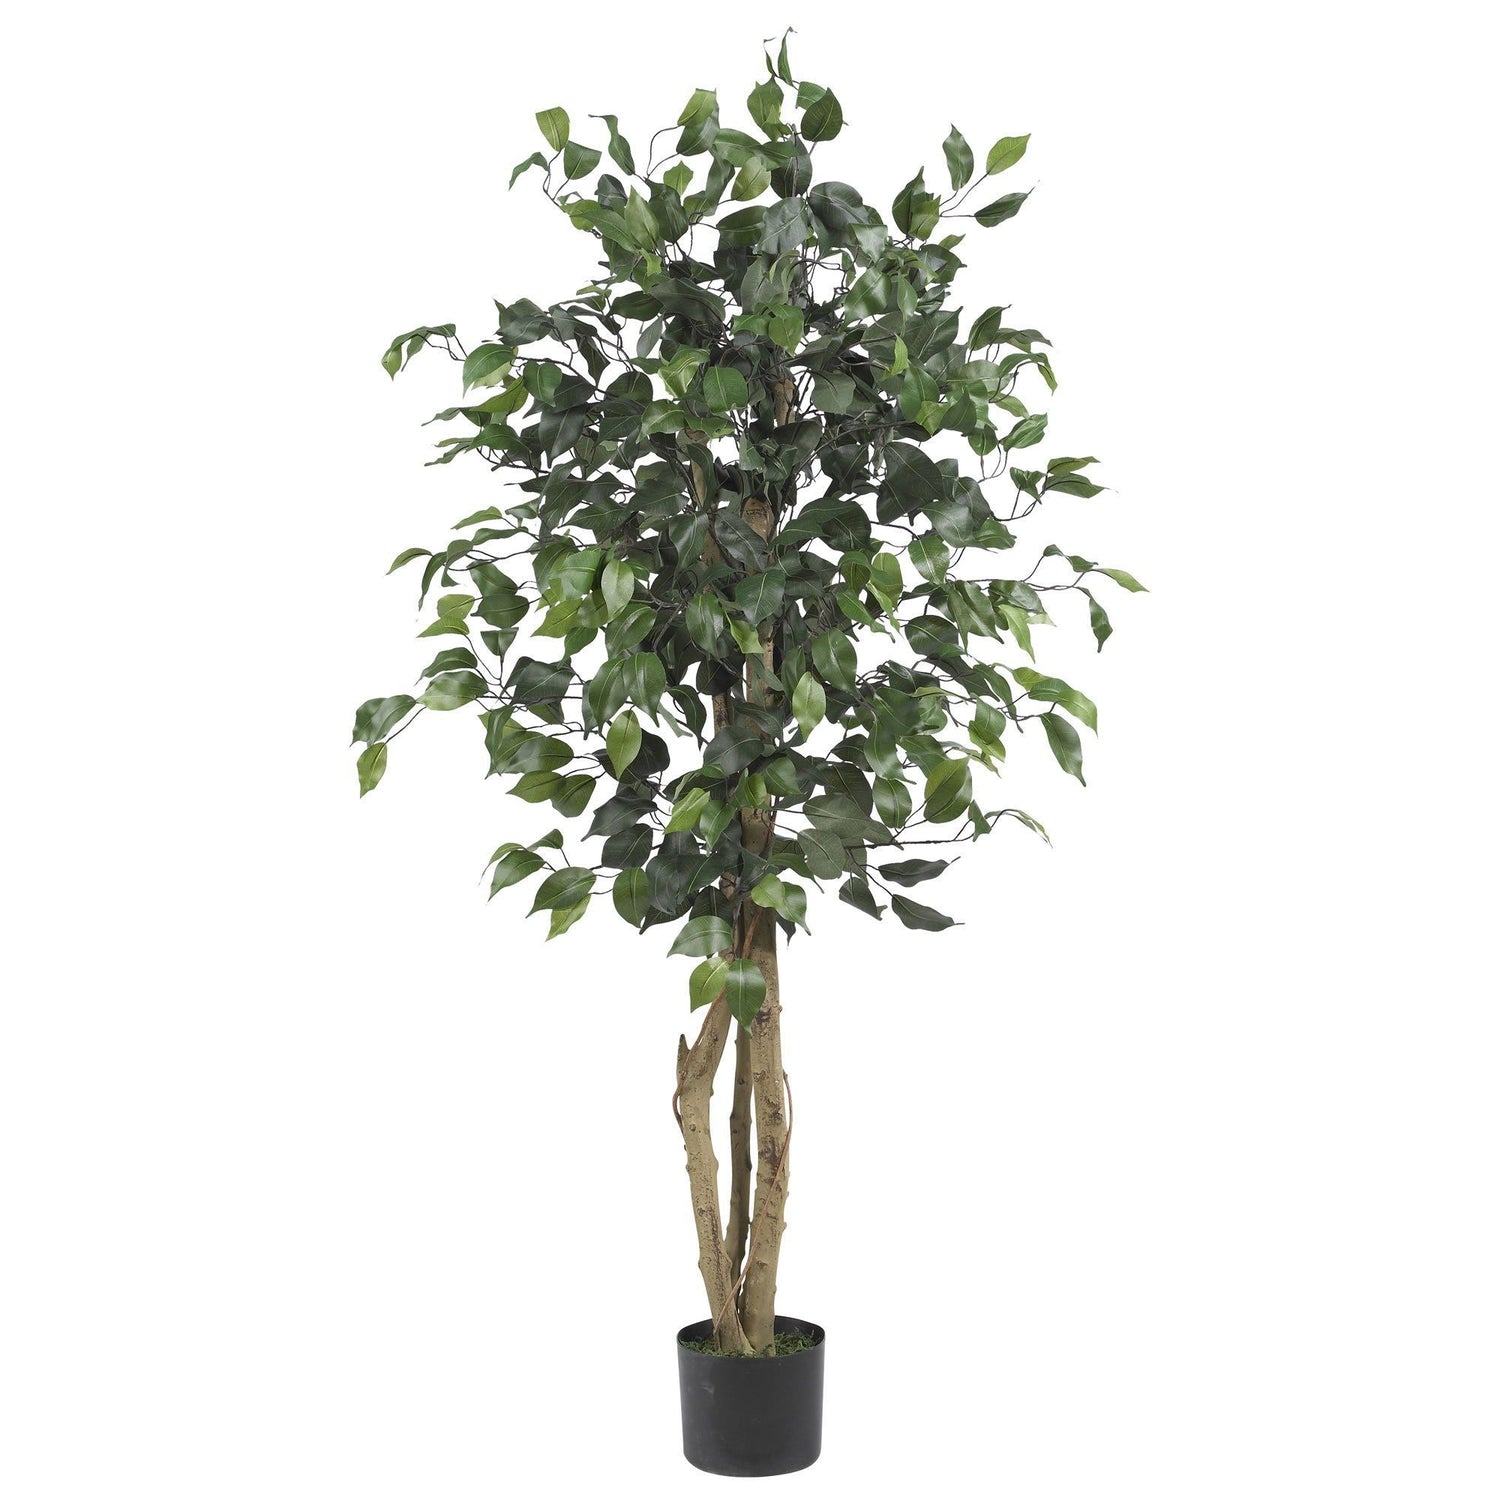 NearlyNatural Artificial 8 ft Tall Large Ficus Tree with 1500+ Leaves